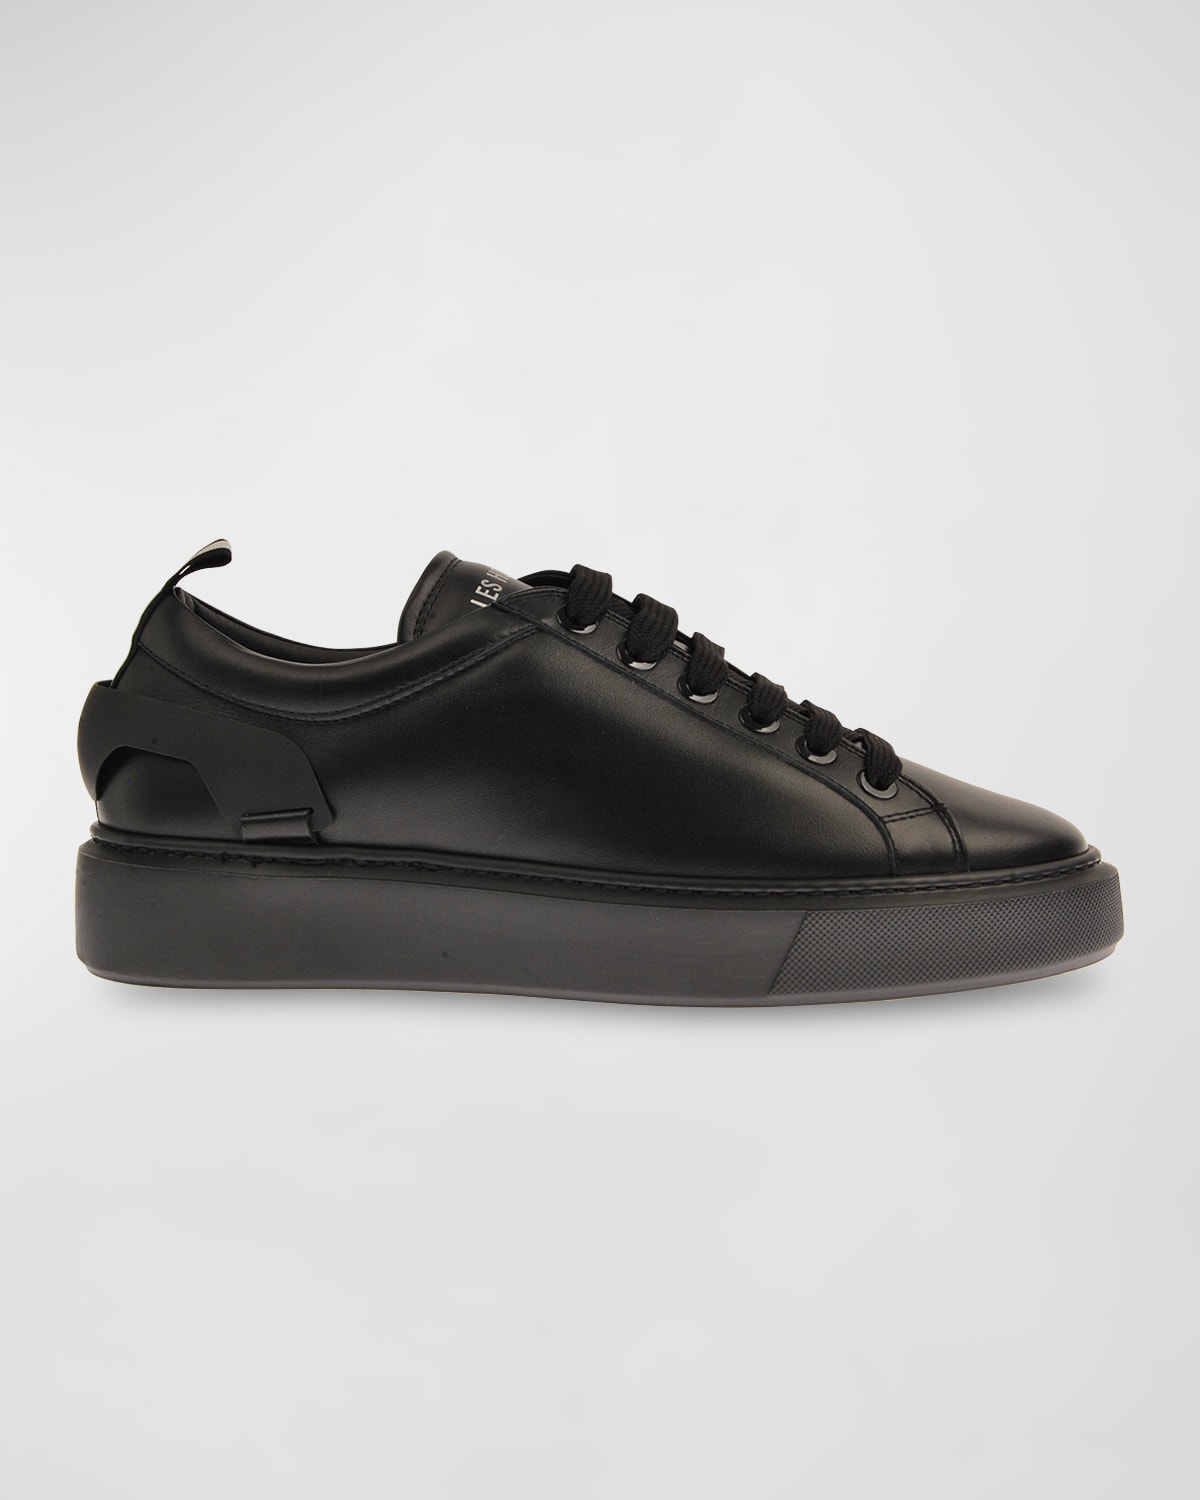 Men's Low-Top Smooth Leather Sneakers